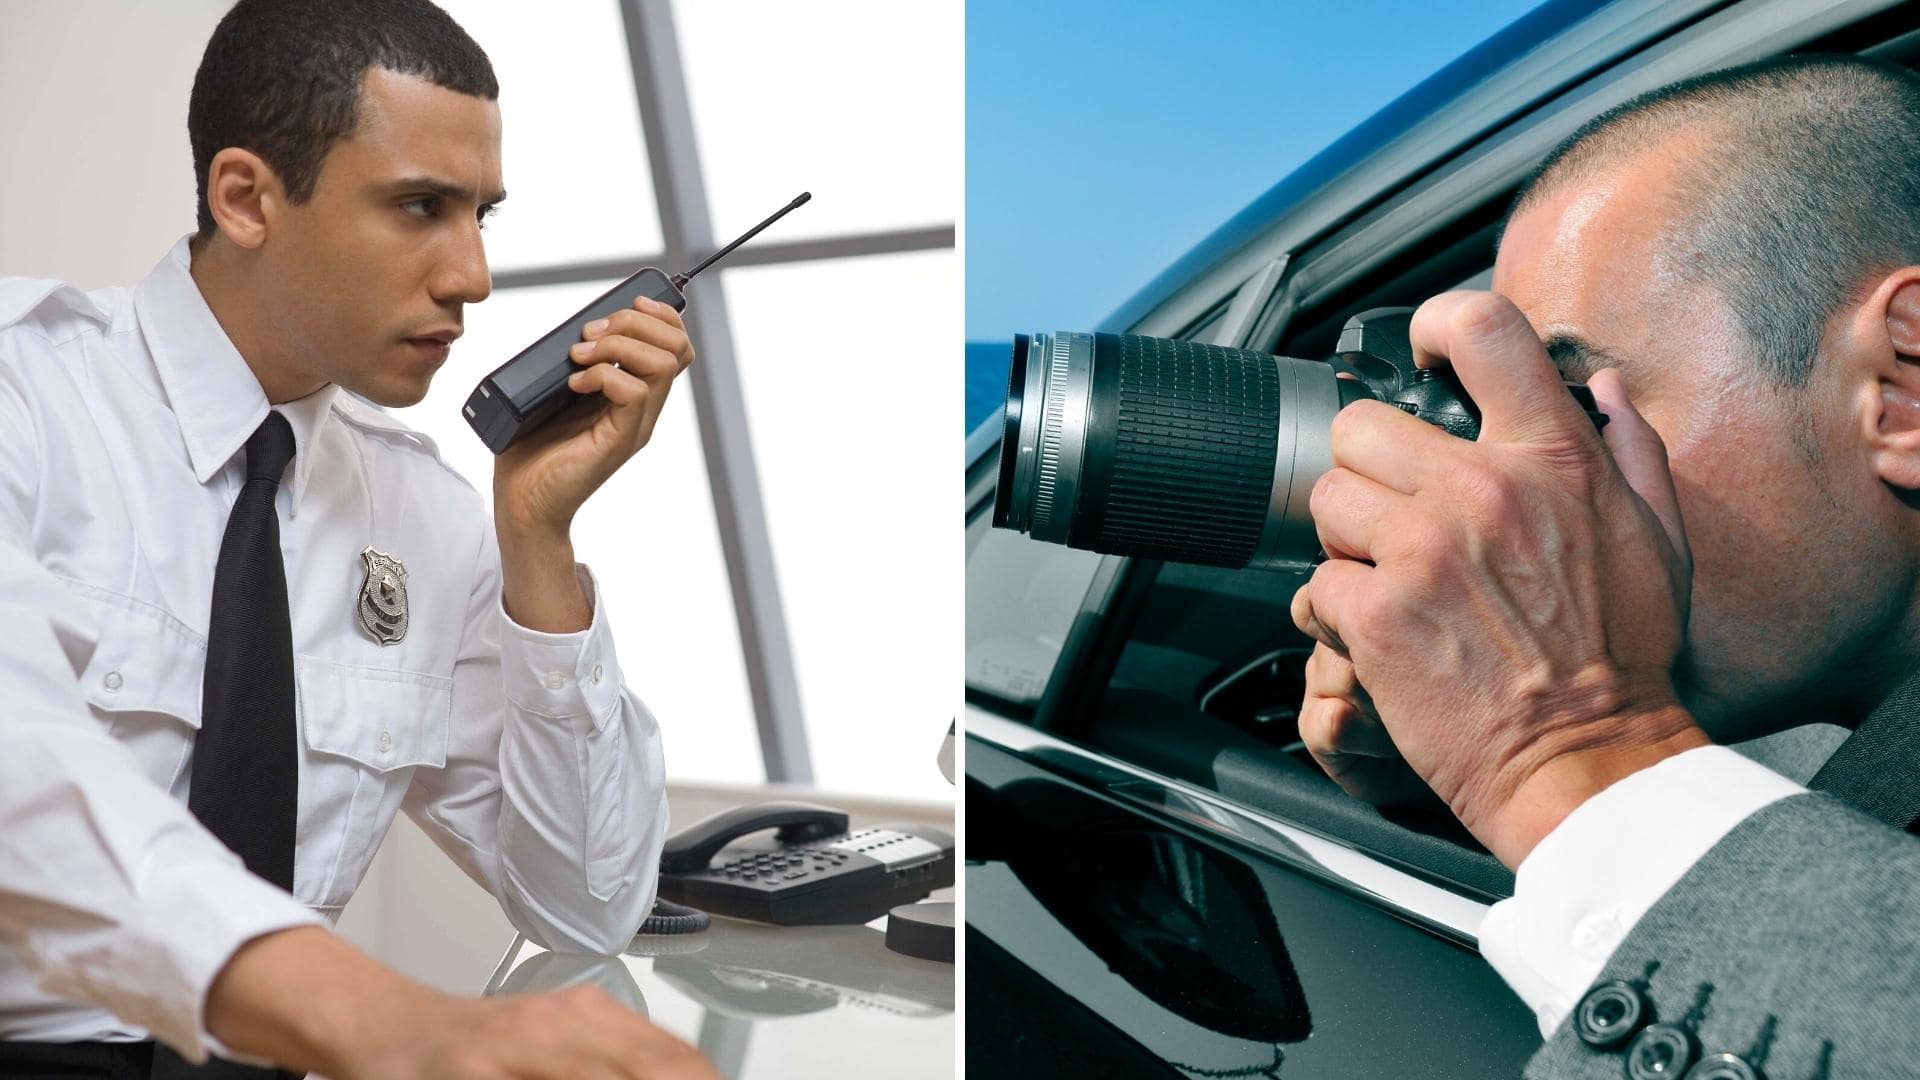 difference between security guards and private investigators